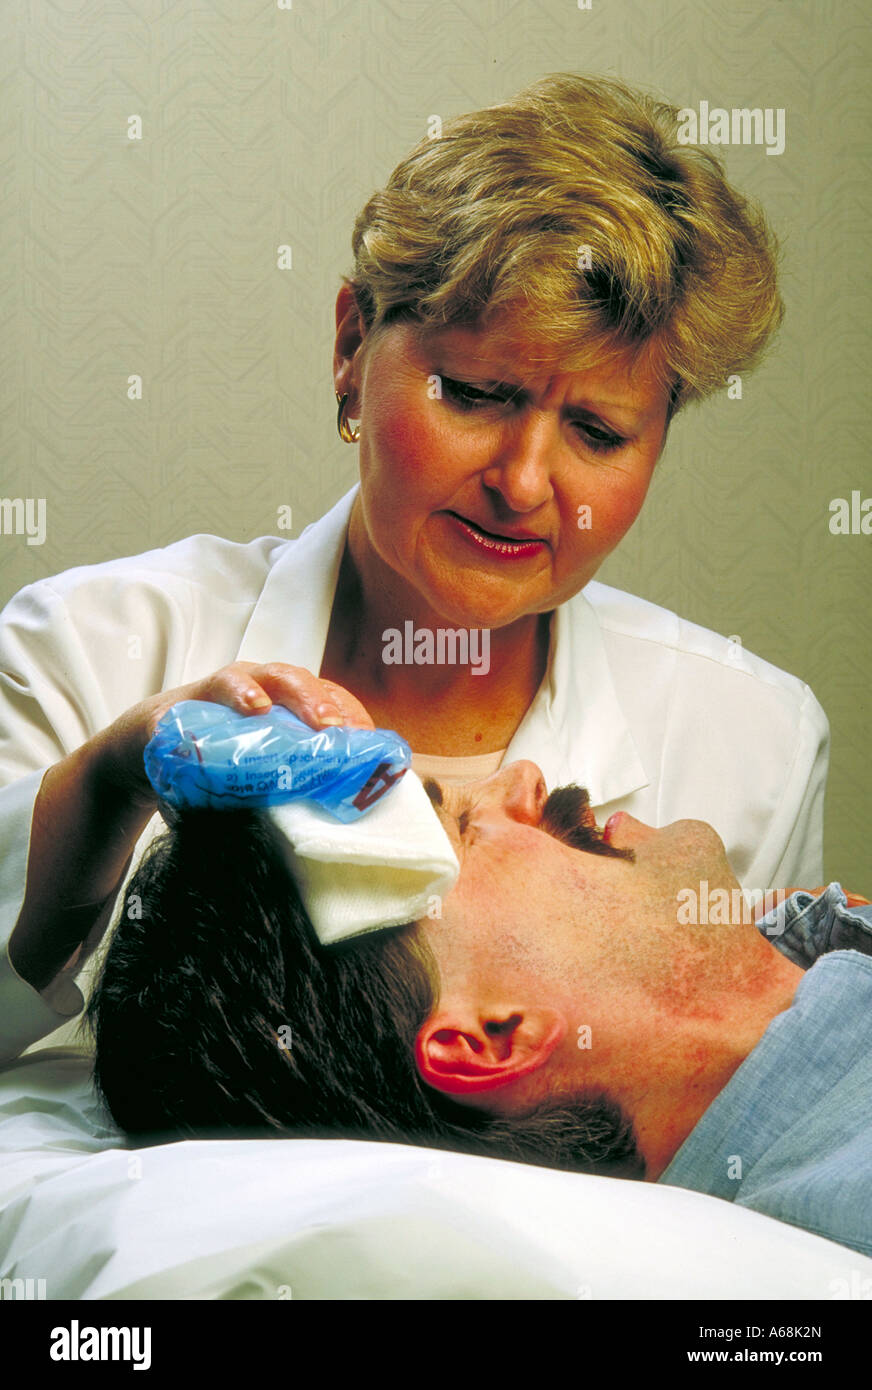 Nurse applies cold compress to head injury patient Stock Photo